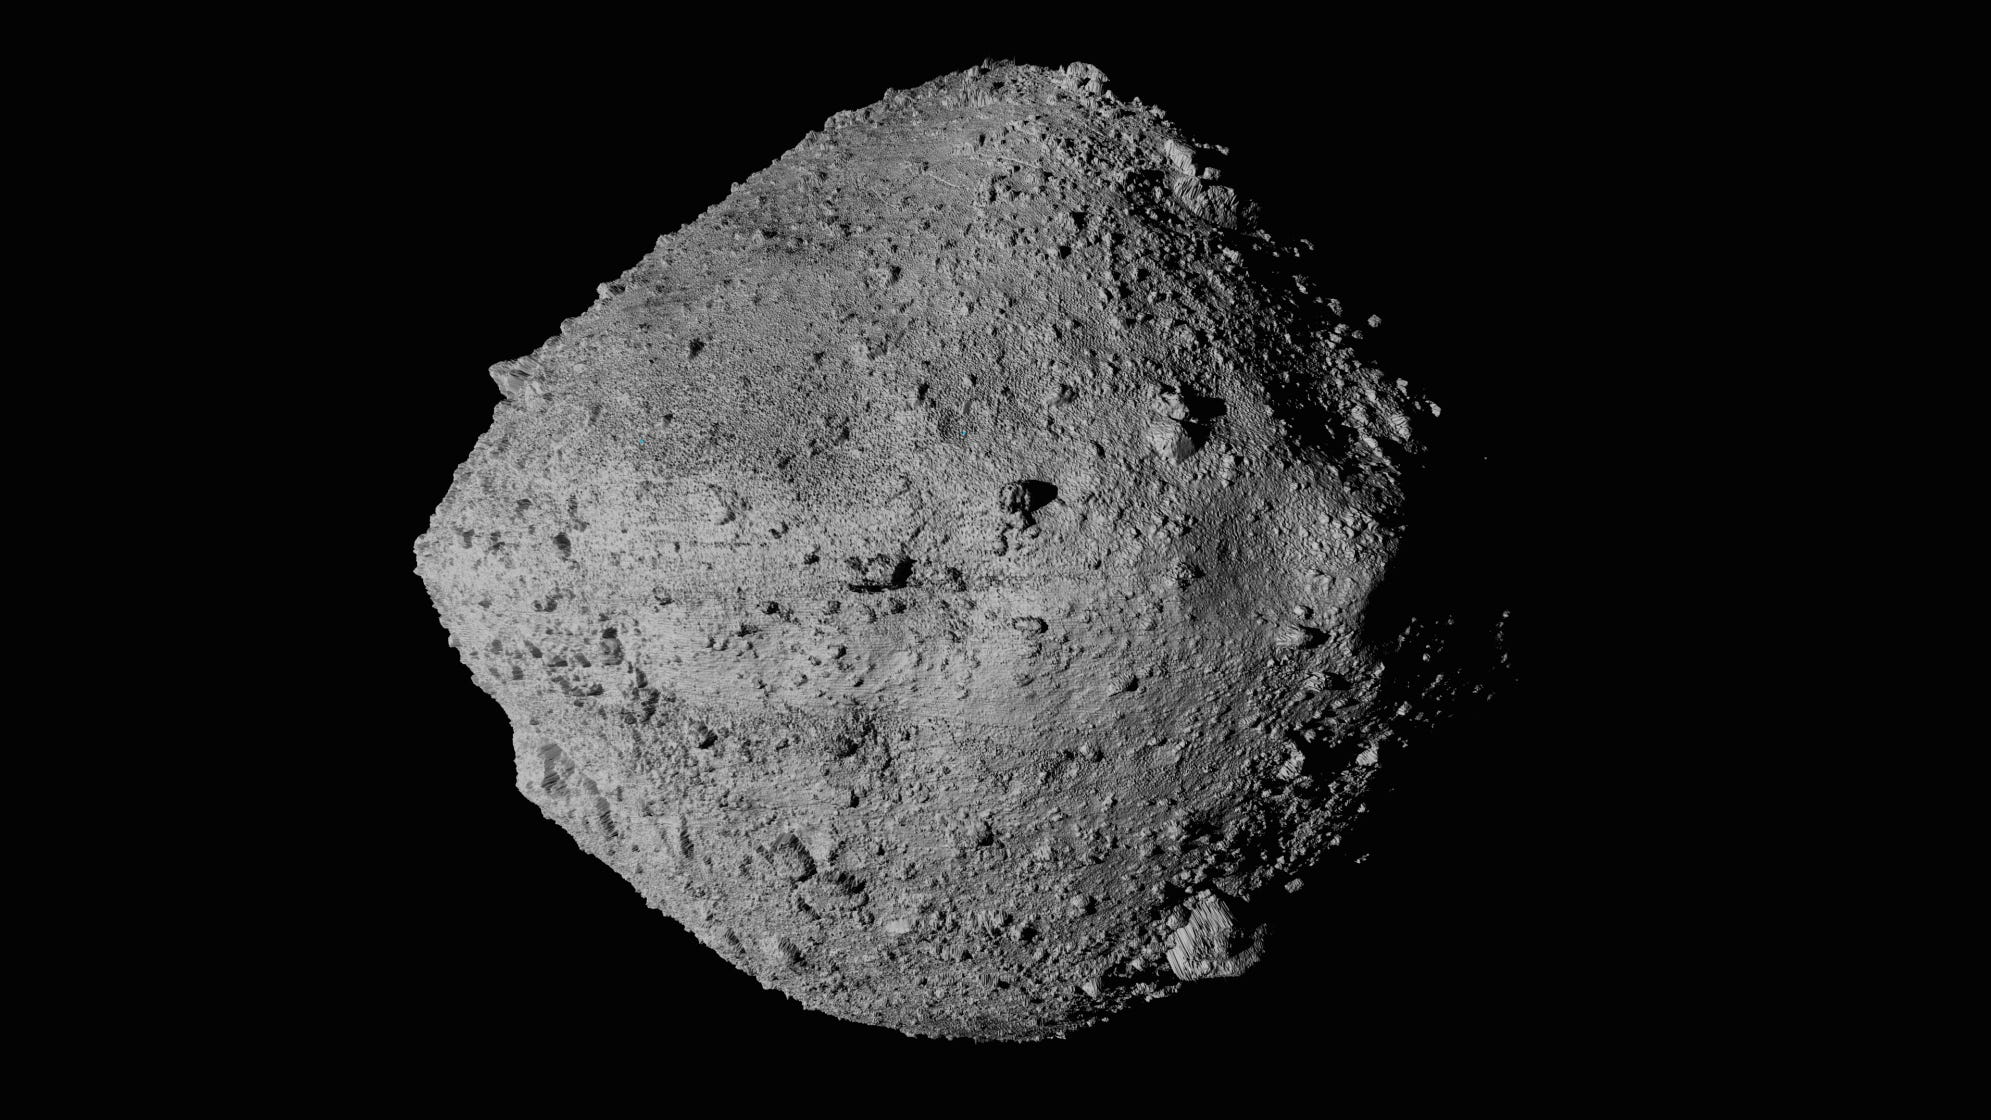 1989 JA to fly by Earth: Largest asteroid to approach us in 2022 - USA TODAY